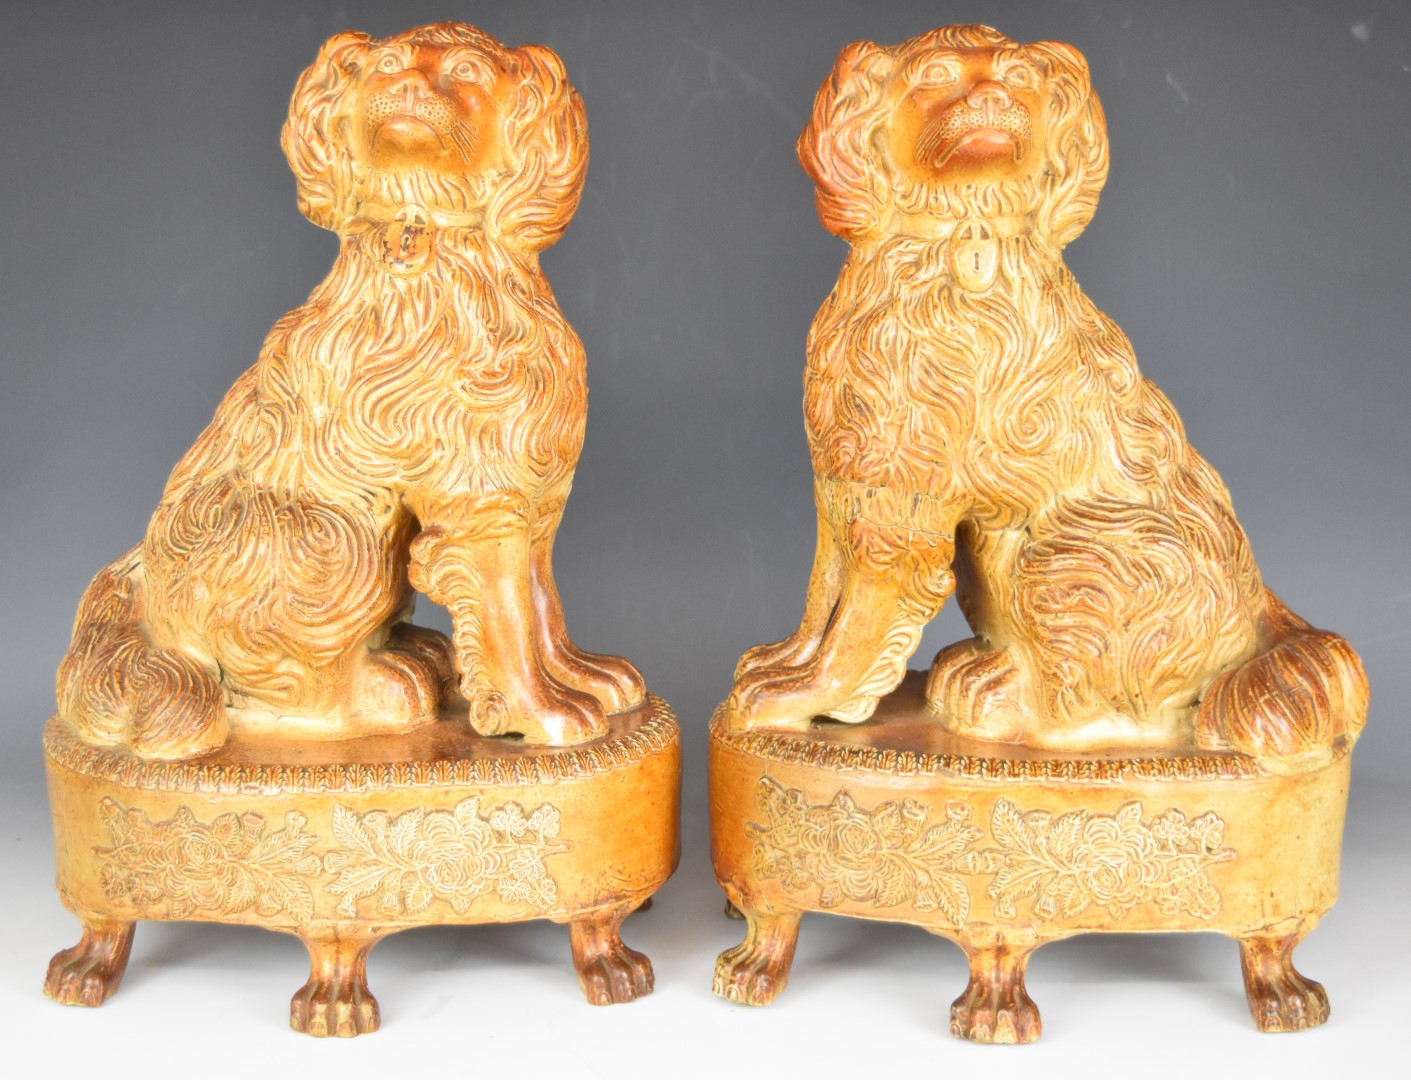 Pair of 19thC S and H Briddon, Brampton brown salt glazed stoneware spaniels / dogs with padlock - Image 5 of 8